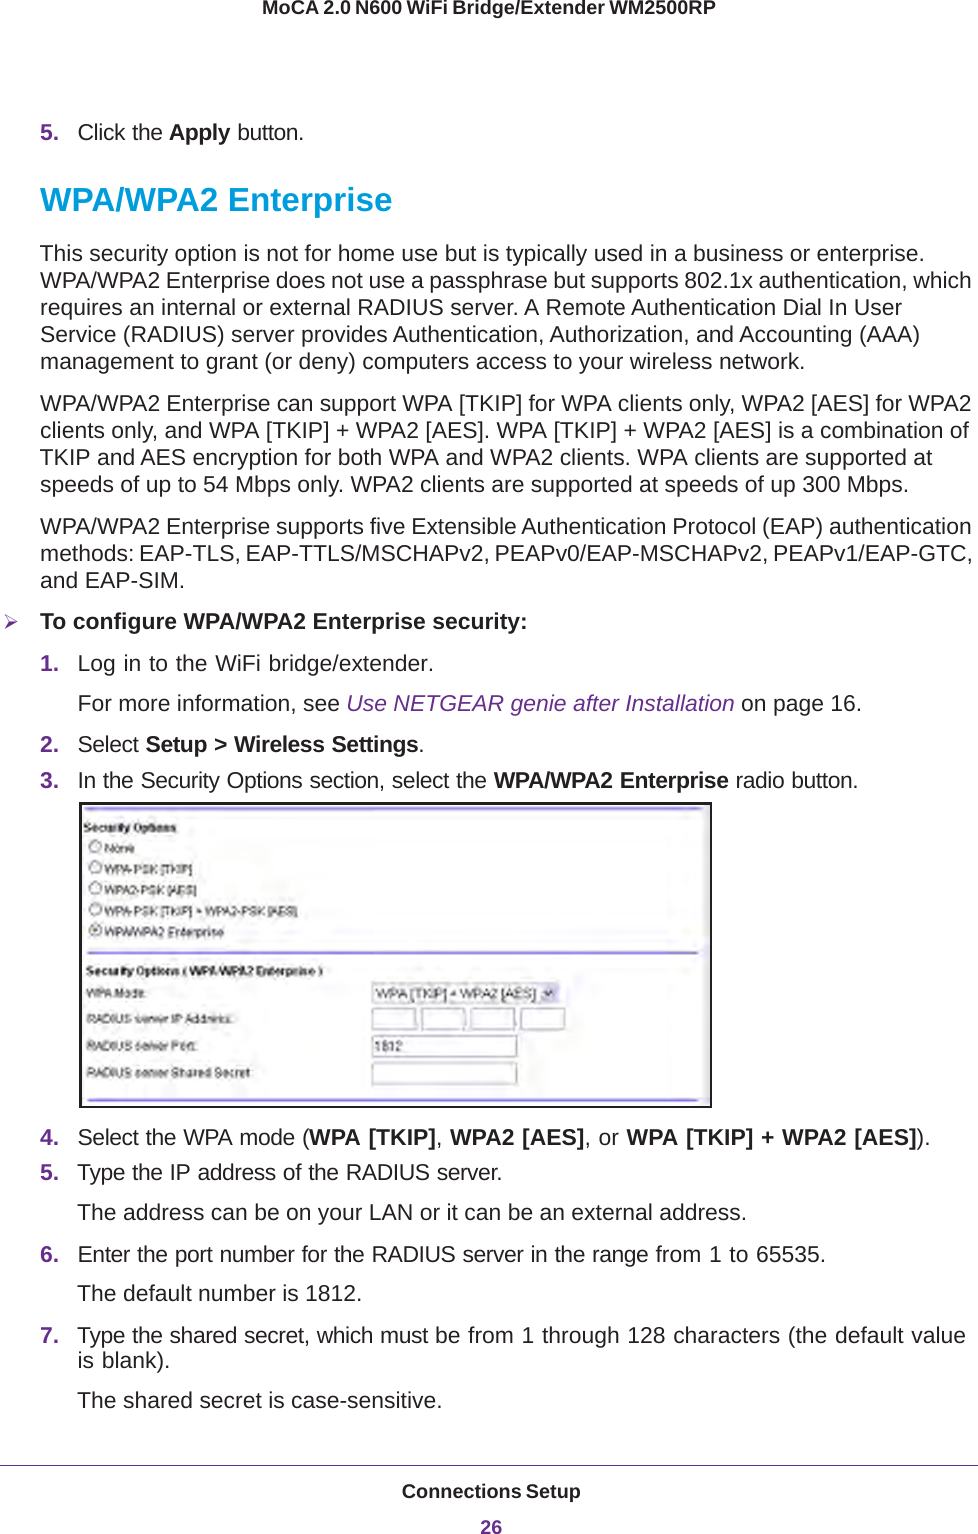 Connections Setup26MoCA 2.0 N600 WiFi Bridge/Extender WM2500RP 5. Click the Apply button.WPA/WPA2 EnterpriseThis security option is not for home use but is typically used in a business or enterprise. WPA/WPA2 Enterprise does not use a passphrase but supports 802.1x authentication, which requires an internal or external RADIUS server. A Remote Authentication Dial In User Service (RADIUS) server provides Authentication, Authorization, and Accounting (AAA) management to grant (or deny) computers access to your wireless network.WPA/WPA2 Enterprise can support WPA [TKIP] for WPA clients only, WPA2 [AES] for WPA2 clients only, and WPA [TKIP] + WPA2 [AES]. WPA [TKIP] + WPA2 [AES] is a combination of TKIP and AES encryption for both WPA and WPA2 clients. WPA clients are supported at speeds of up to 54  Mbps only. WPA2 clients are supported at speeds of up 300 Mbps.WPA/WPA2 Enterprise supports five Extensible Authentication Protocol (EAP) authentication methods: EAP-TLS, EAP-TTLS/MSCHAPv2, PEAPv0/EAP-MSCHAPv2, PEAPv1/EAP-GTC, and EAP-SIM.To configure WPA/WPA2 Enterprise security:1. Log in to the WiFi bridge/extender.For more information, see Use NETGEAR genie after Installation on page  16.2. Select Setup &gt; Wireless Settings.3. In the Security Options section, select the WPA/WPA2 Enterprise radio button.4. Select the WPA mode (WPA [TKIP], WPA2 [AES], or WPA [TKIP] + WPA2 [AES]).5. Type the IP address of the RADIUS server.The address can be on your LAN or it can be an external address.6. Enter the port number for the RADIUS server in the range from 1 to 65535.The default number is 1812.7. Type the shared secret, which must be from 1 through 128 characters (the default value is blank). The shared secret is case-sensitive.